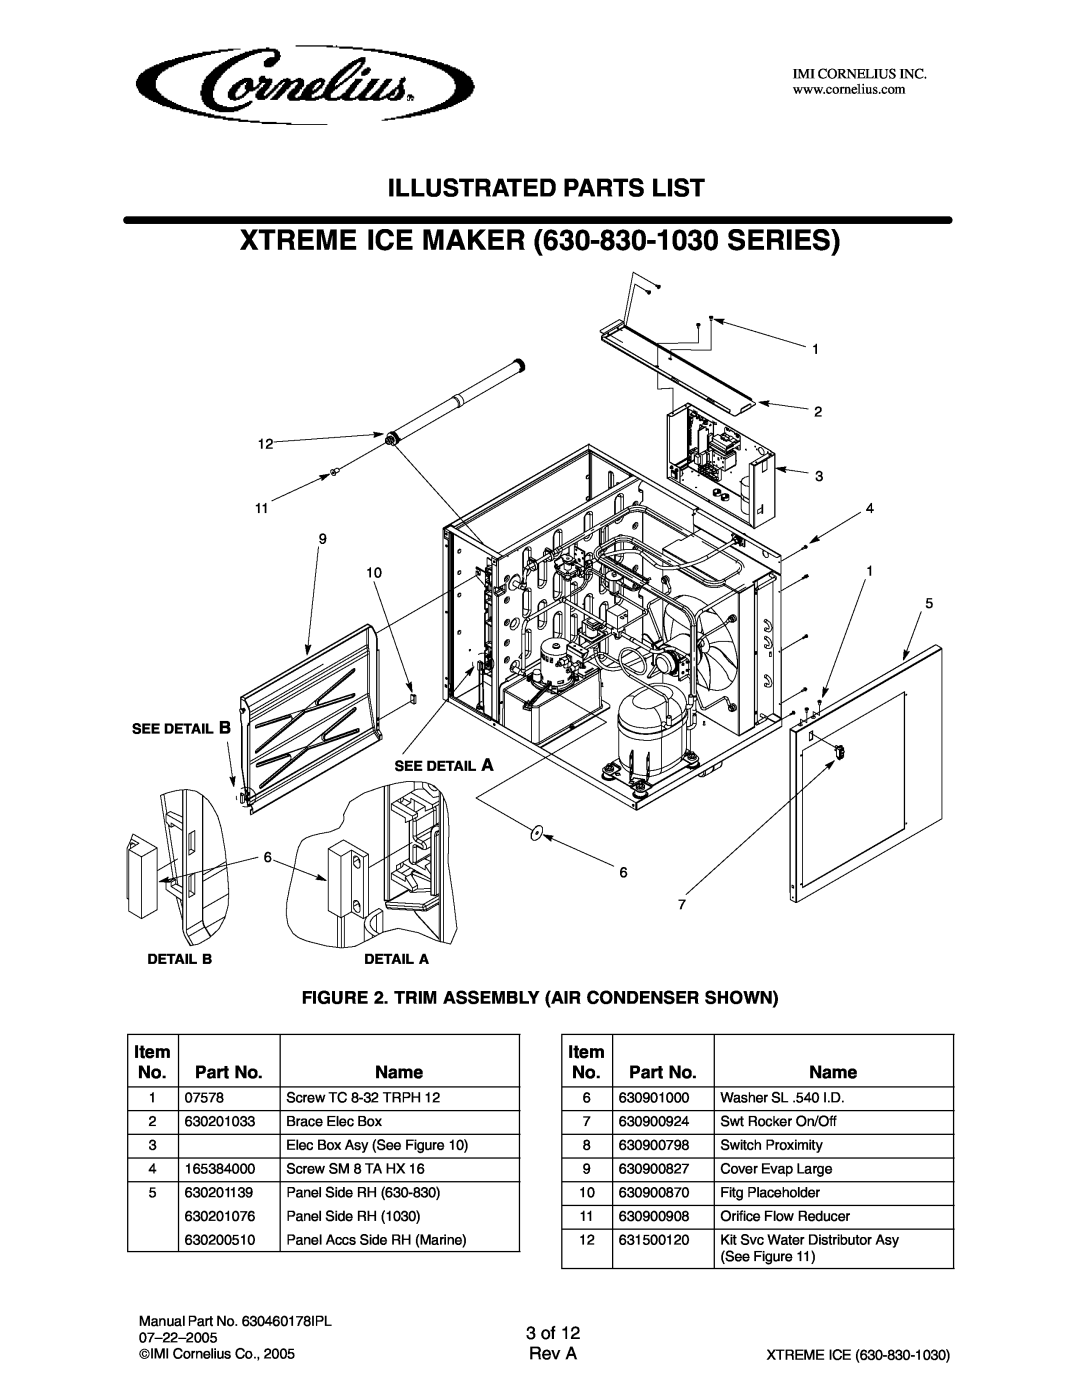 Cornelius 631806020 3 of, XTREME ICE MAKER 630-830-1030SERIES, Illustrated Parts List, Rev A, See Detail B See Detail A 